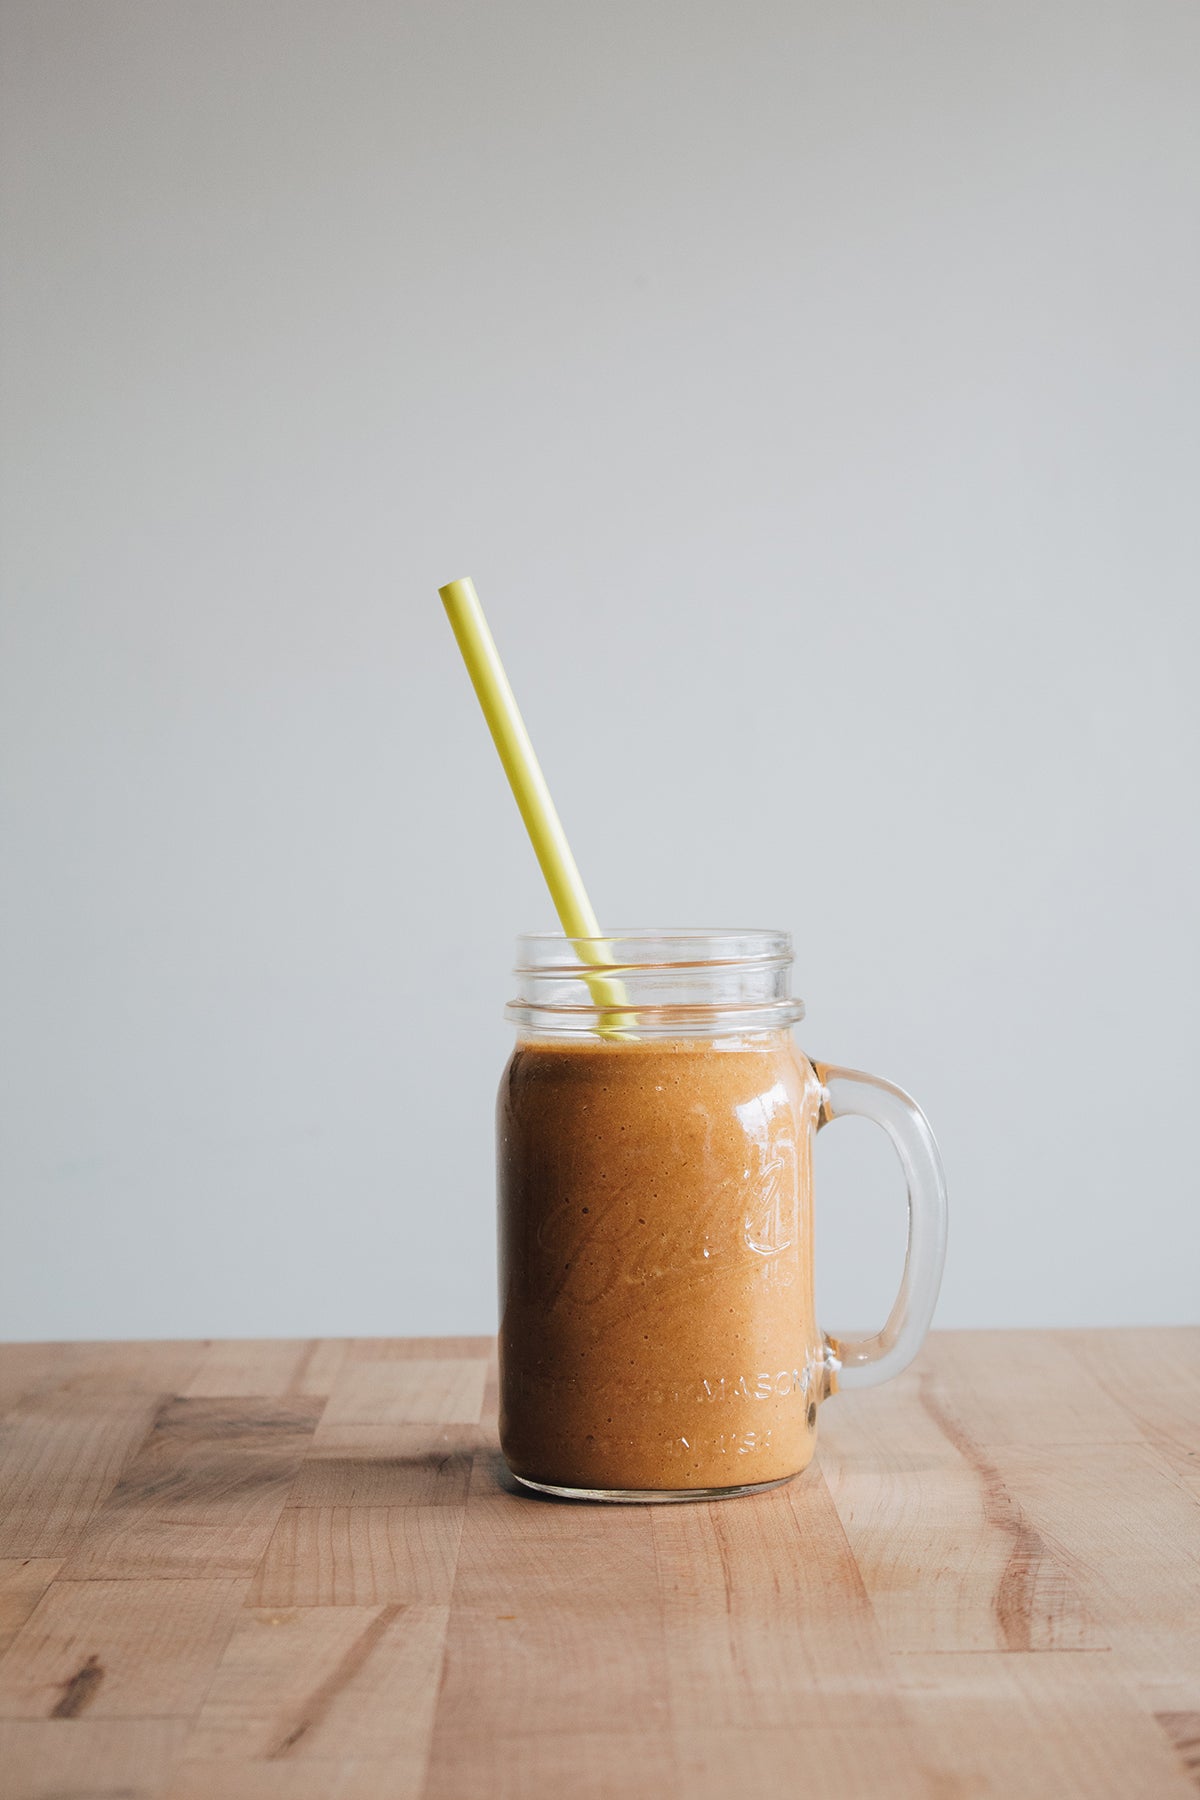 Summer Peach Smoothie with Turmeric and Cinnamon